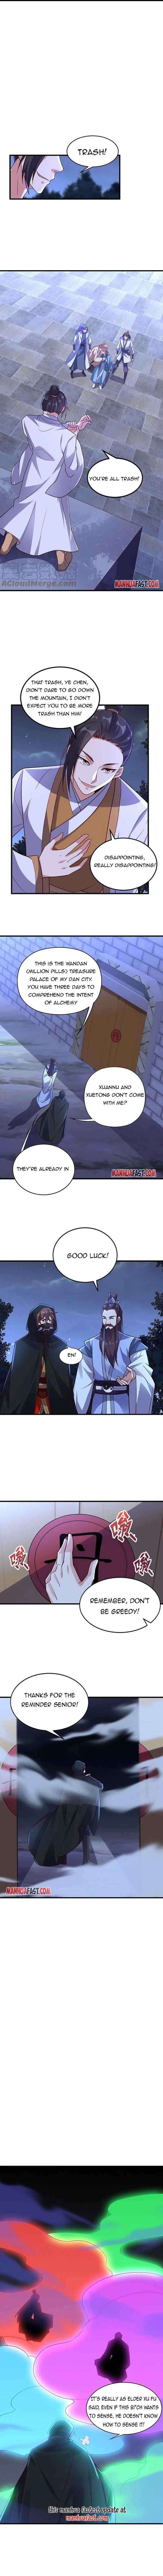 Banished Disciple's Counterattack Chapter 301 page 6